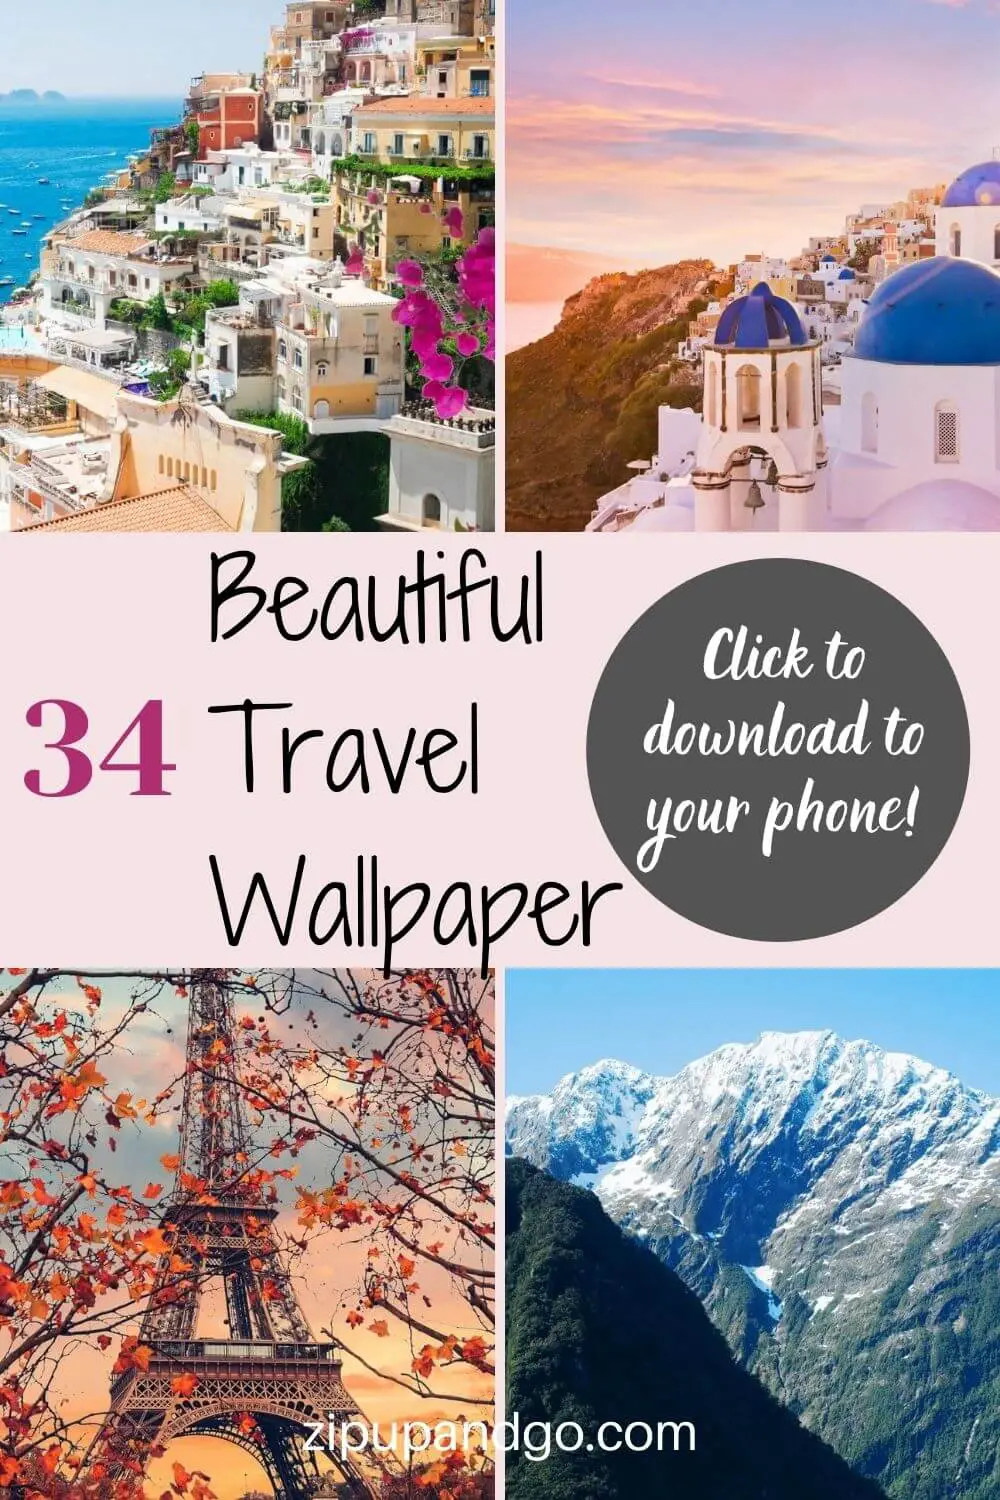 Beautiful Travel Aesthetic Wallpaper For Free Download pinterest 1